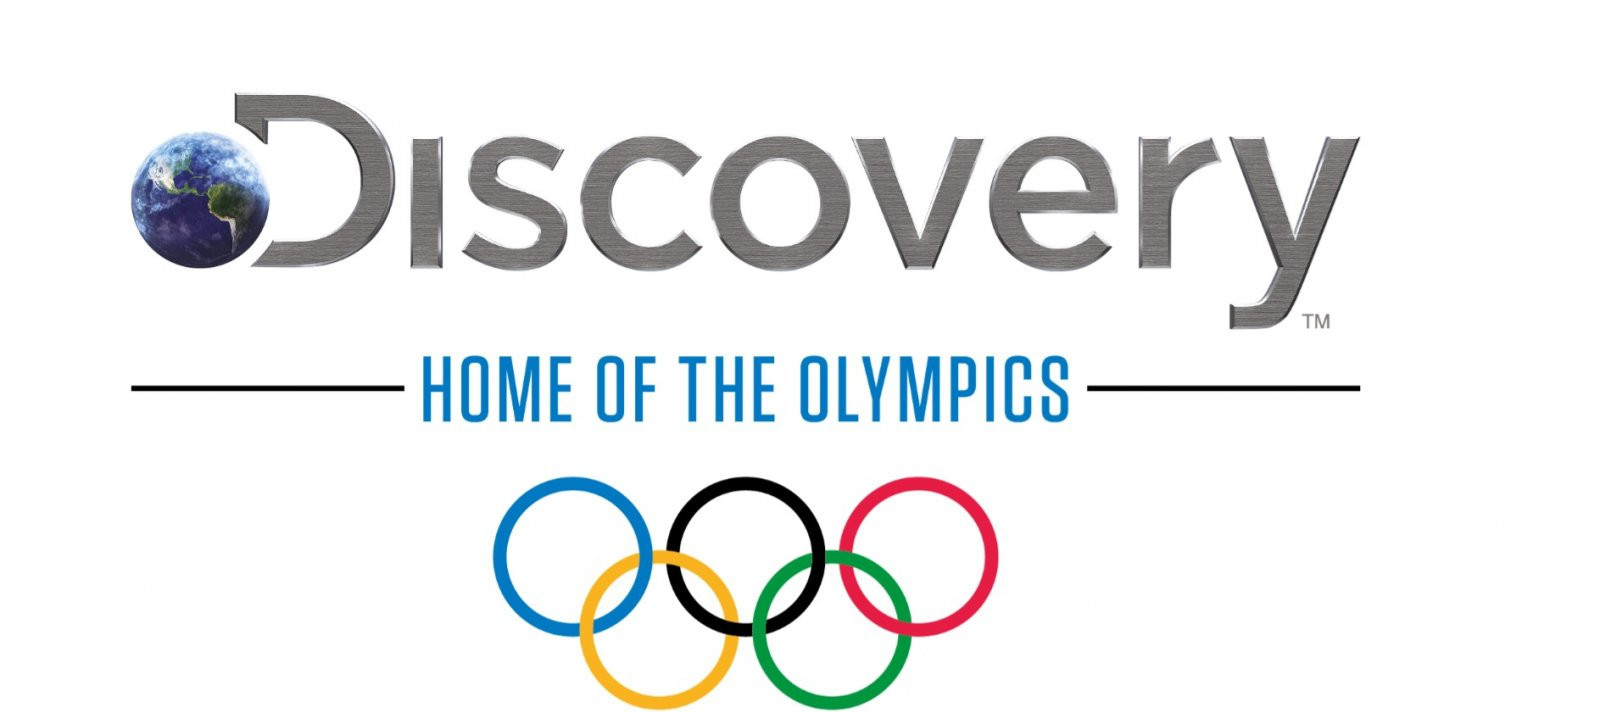 Olympic rights-holder Discovery takes channels off air in Russia after Ukraine invasion